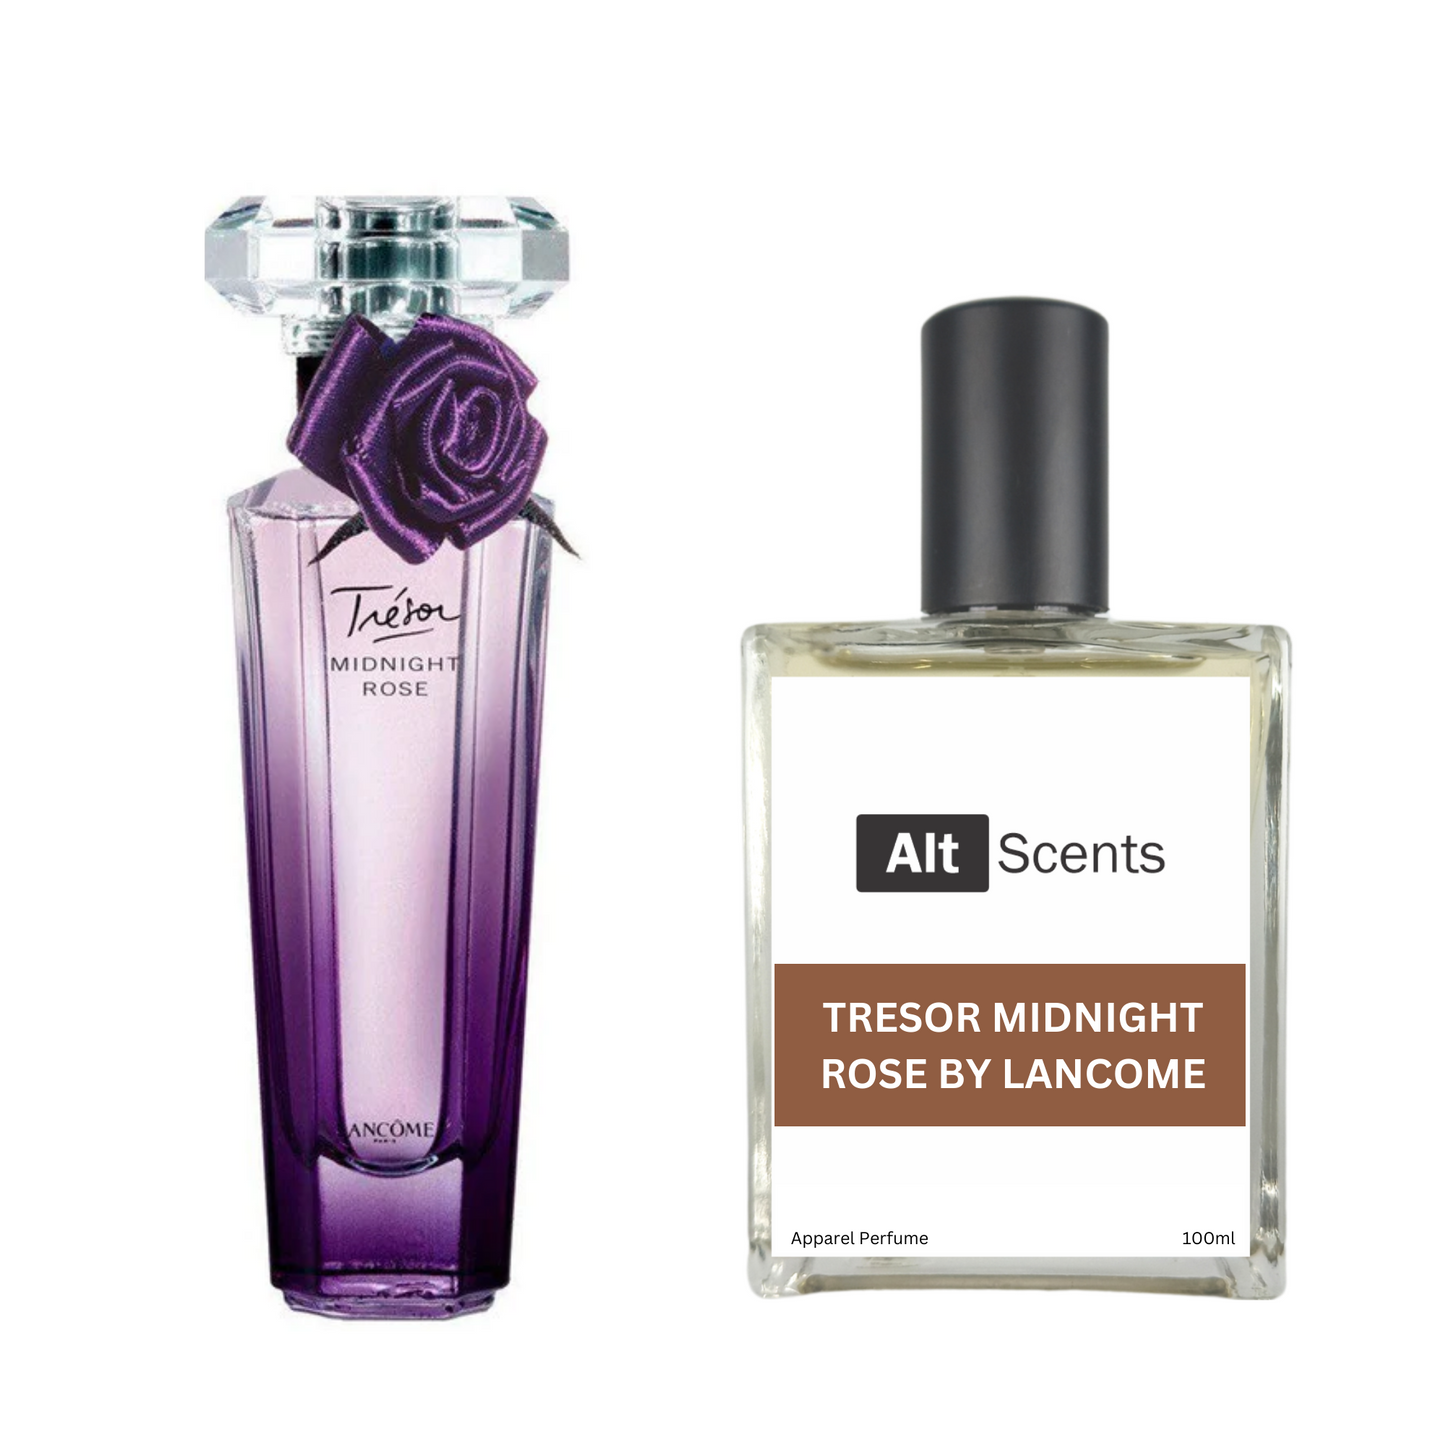 Tresor Midnight Rose by Lancome type Perfume for Women